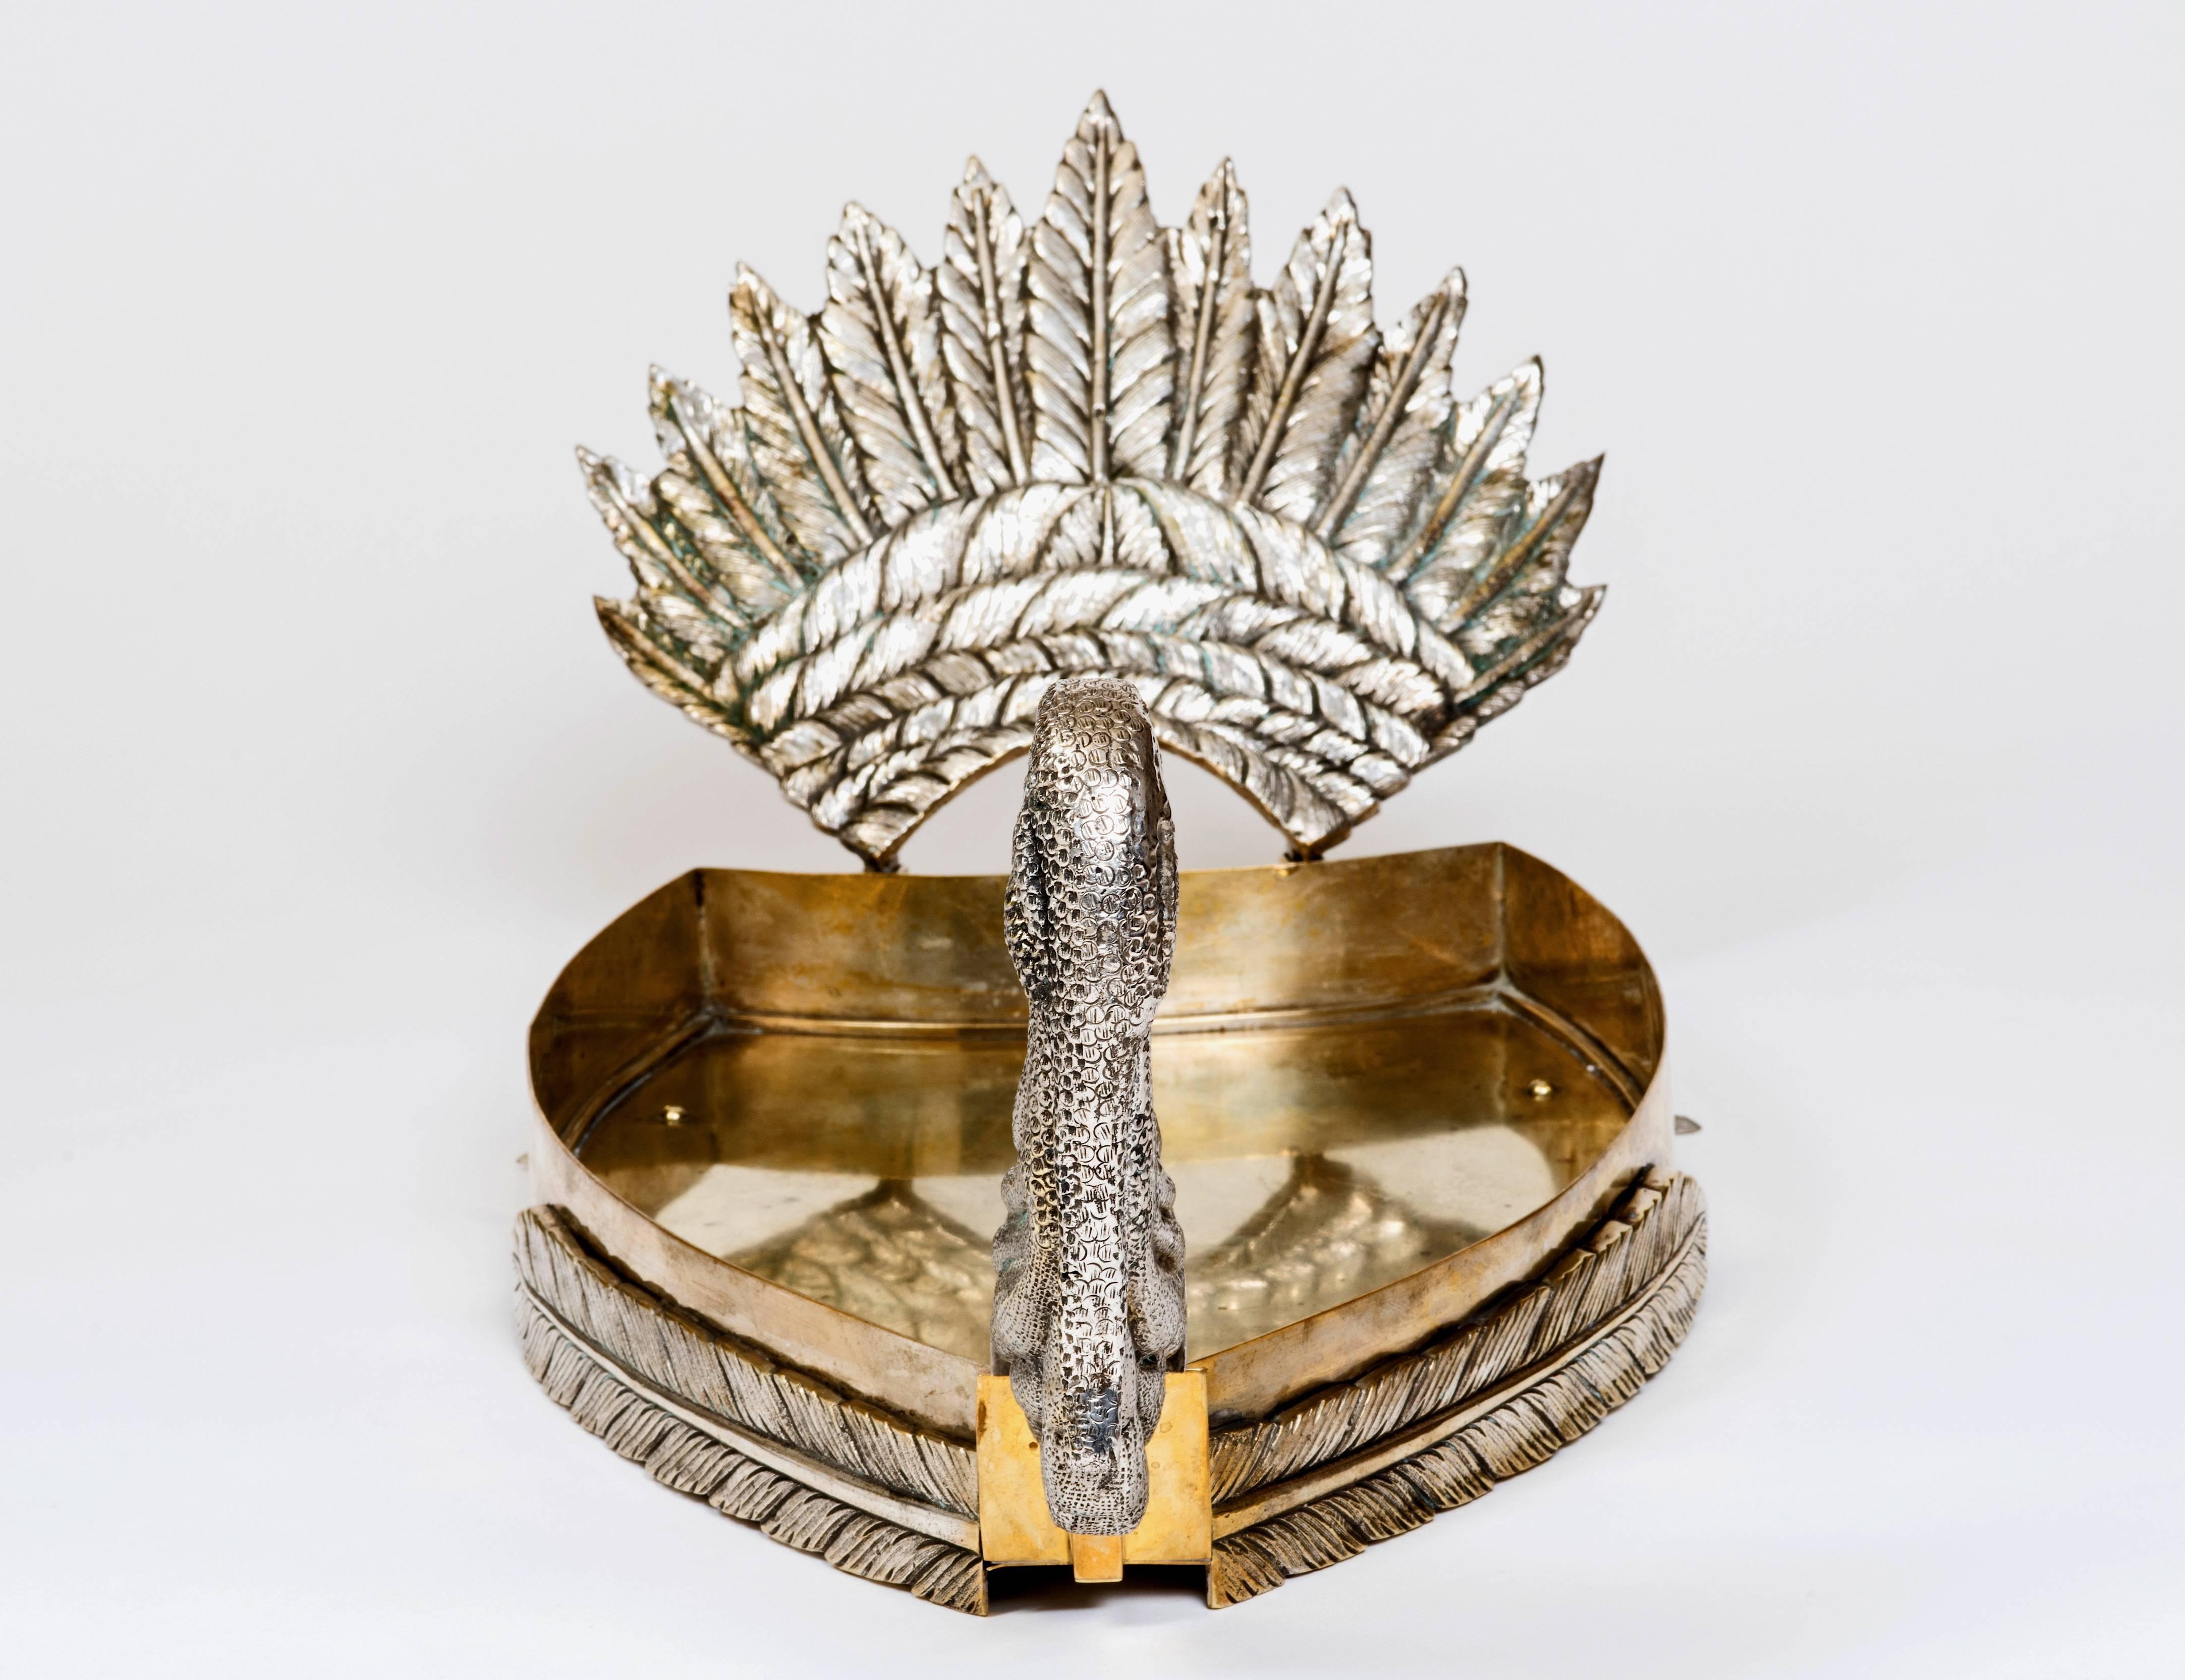 Extremely rare, extra large, English Turkey platter, circa 19th century no doubt one of a kind. Dramatic tail feathers adorn this platter along with exceptional detail and craftsmanship even down to his tiny back feet. Both his amazing head and tail